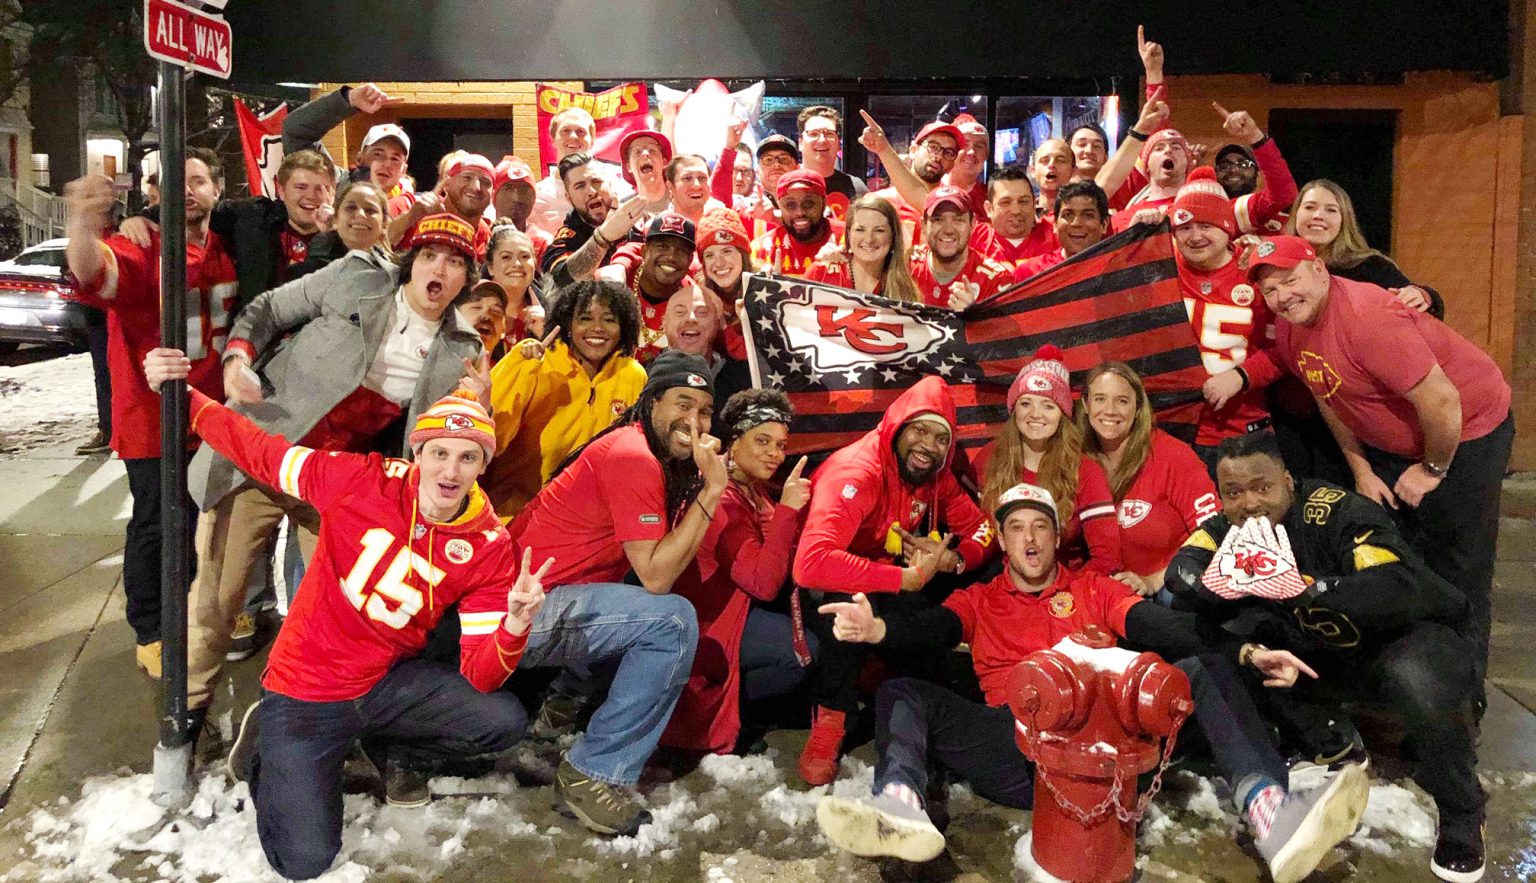 Chicago’s Kansas City Chiefs bar fans erupt during playoff win - Medill Reports Chicago